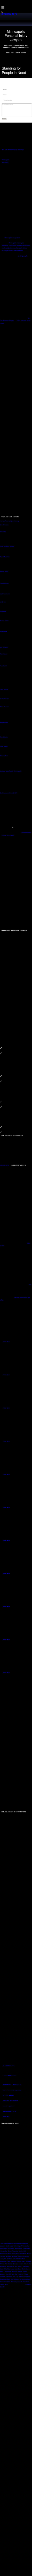 Hall Law Personal Injury Attorneys - St. Cloud Office - Saint Cloud MN Lawyers